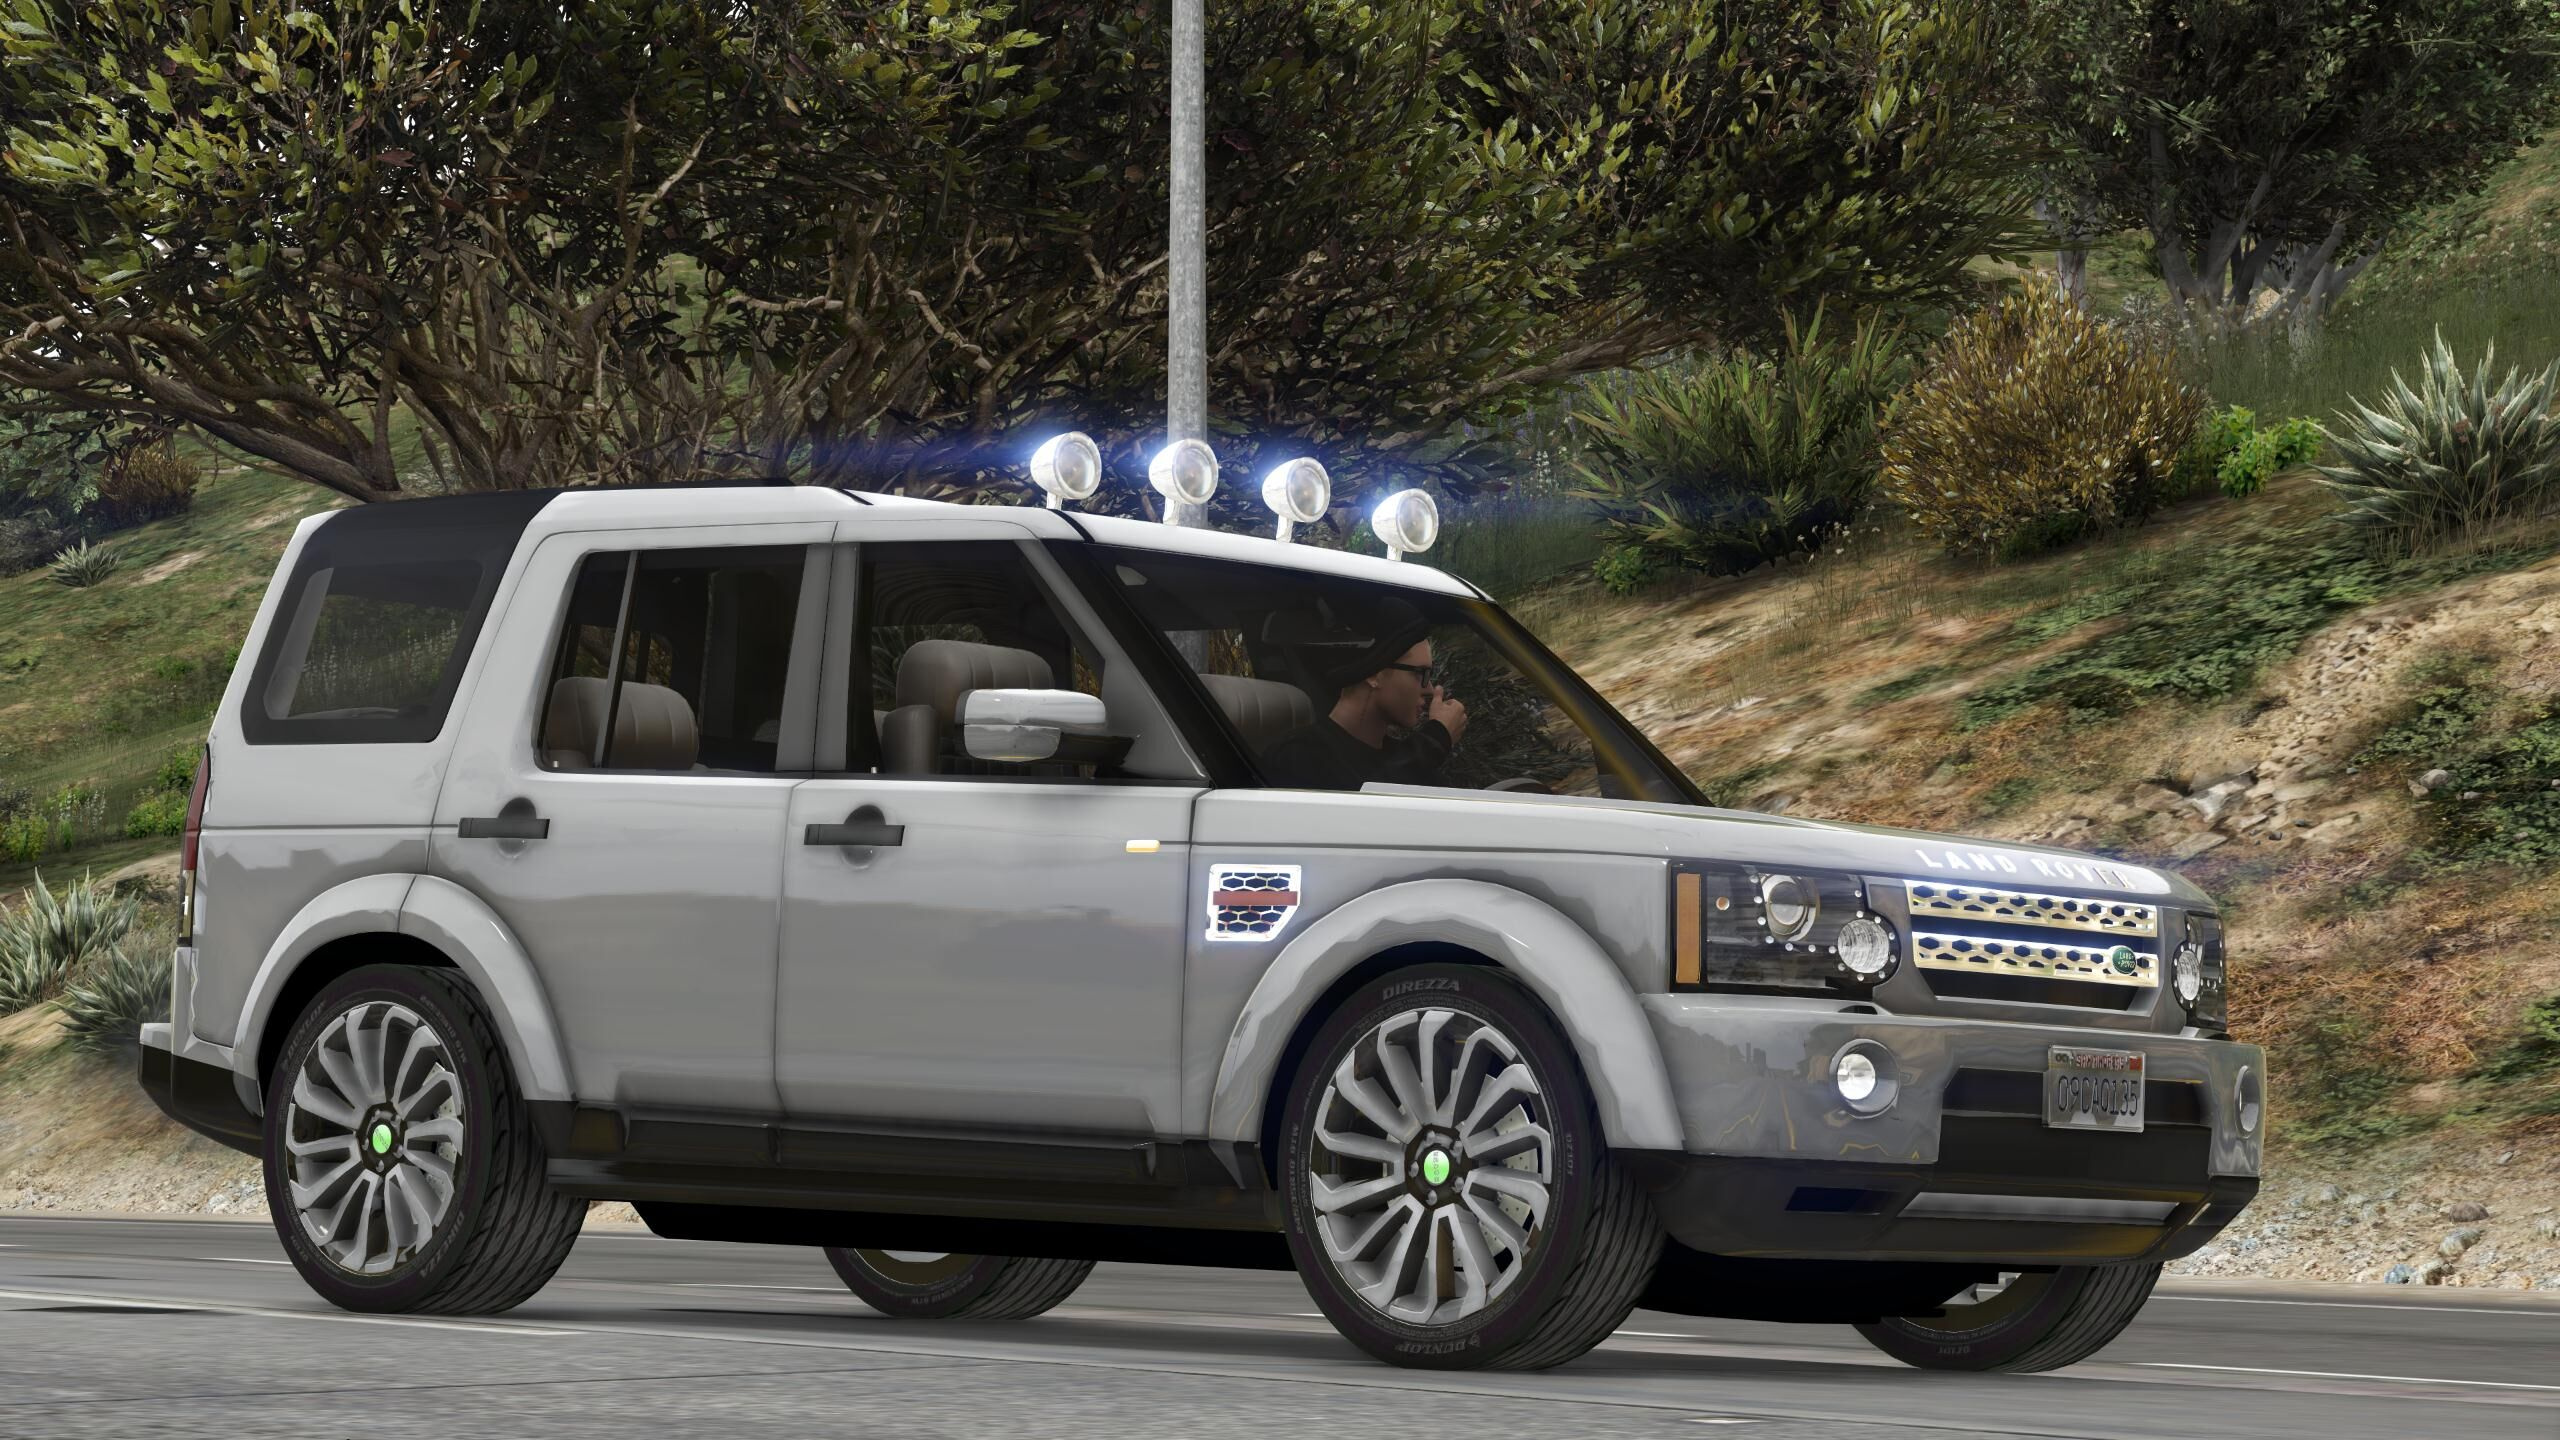 Gta 5 land rover discovery